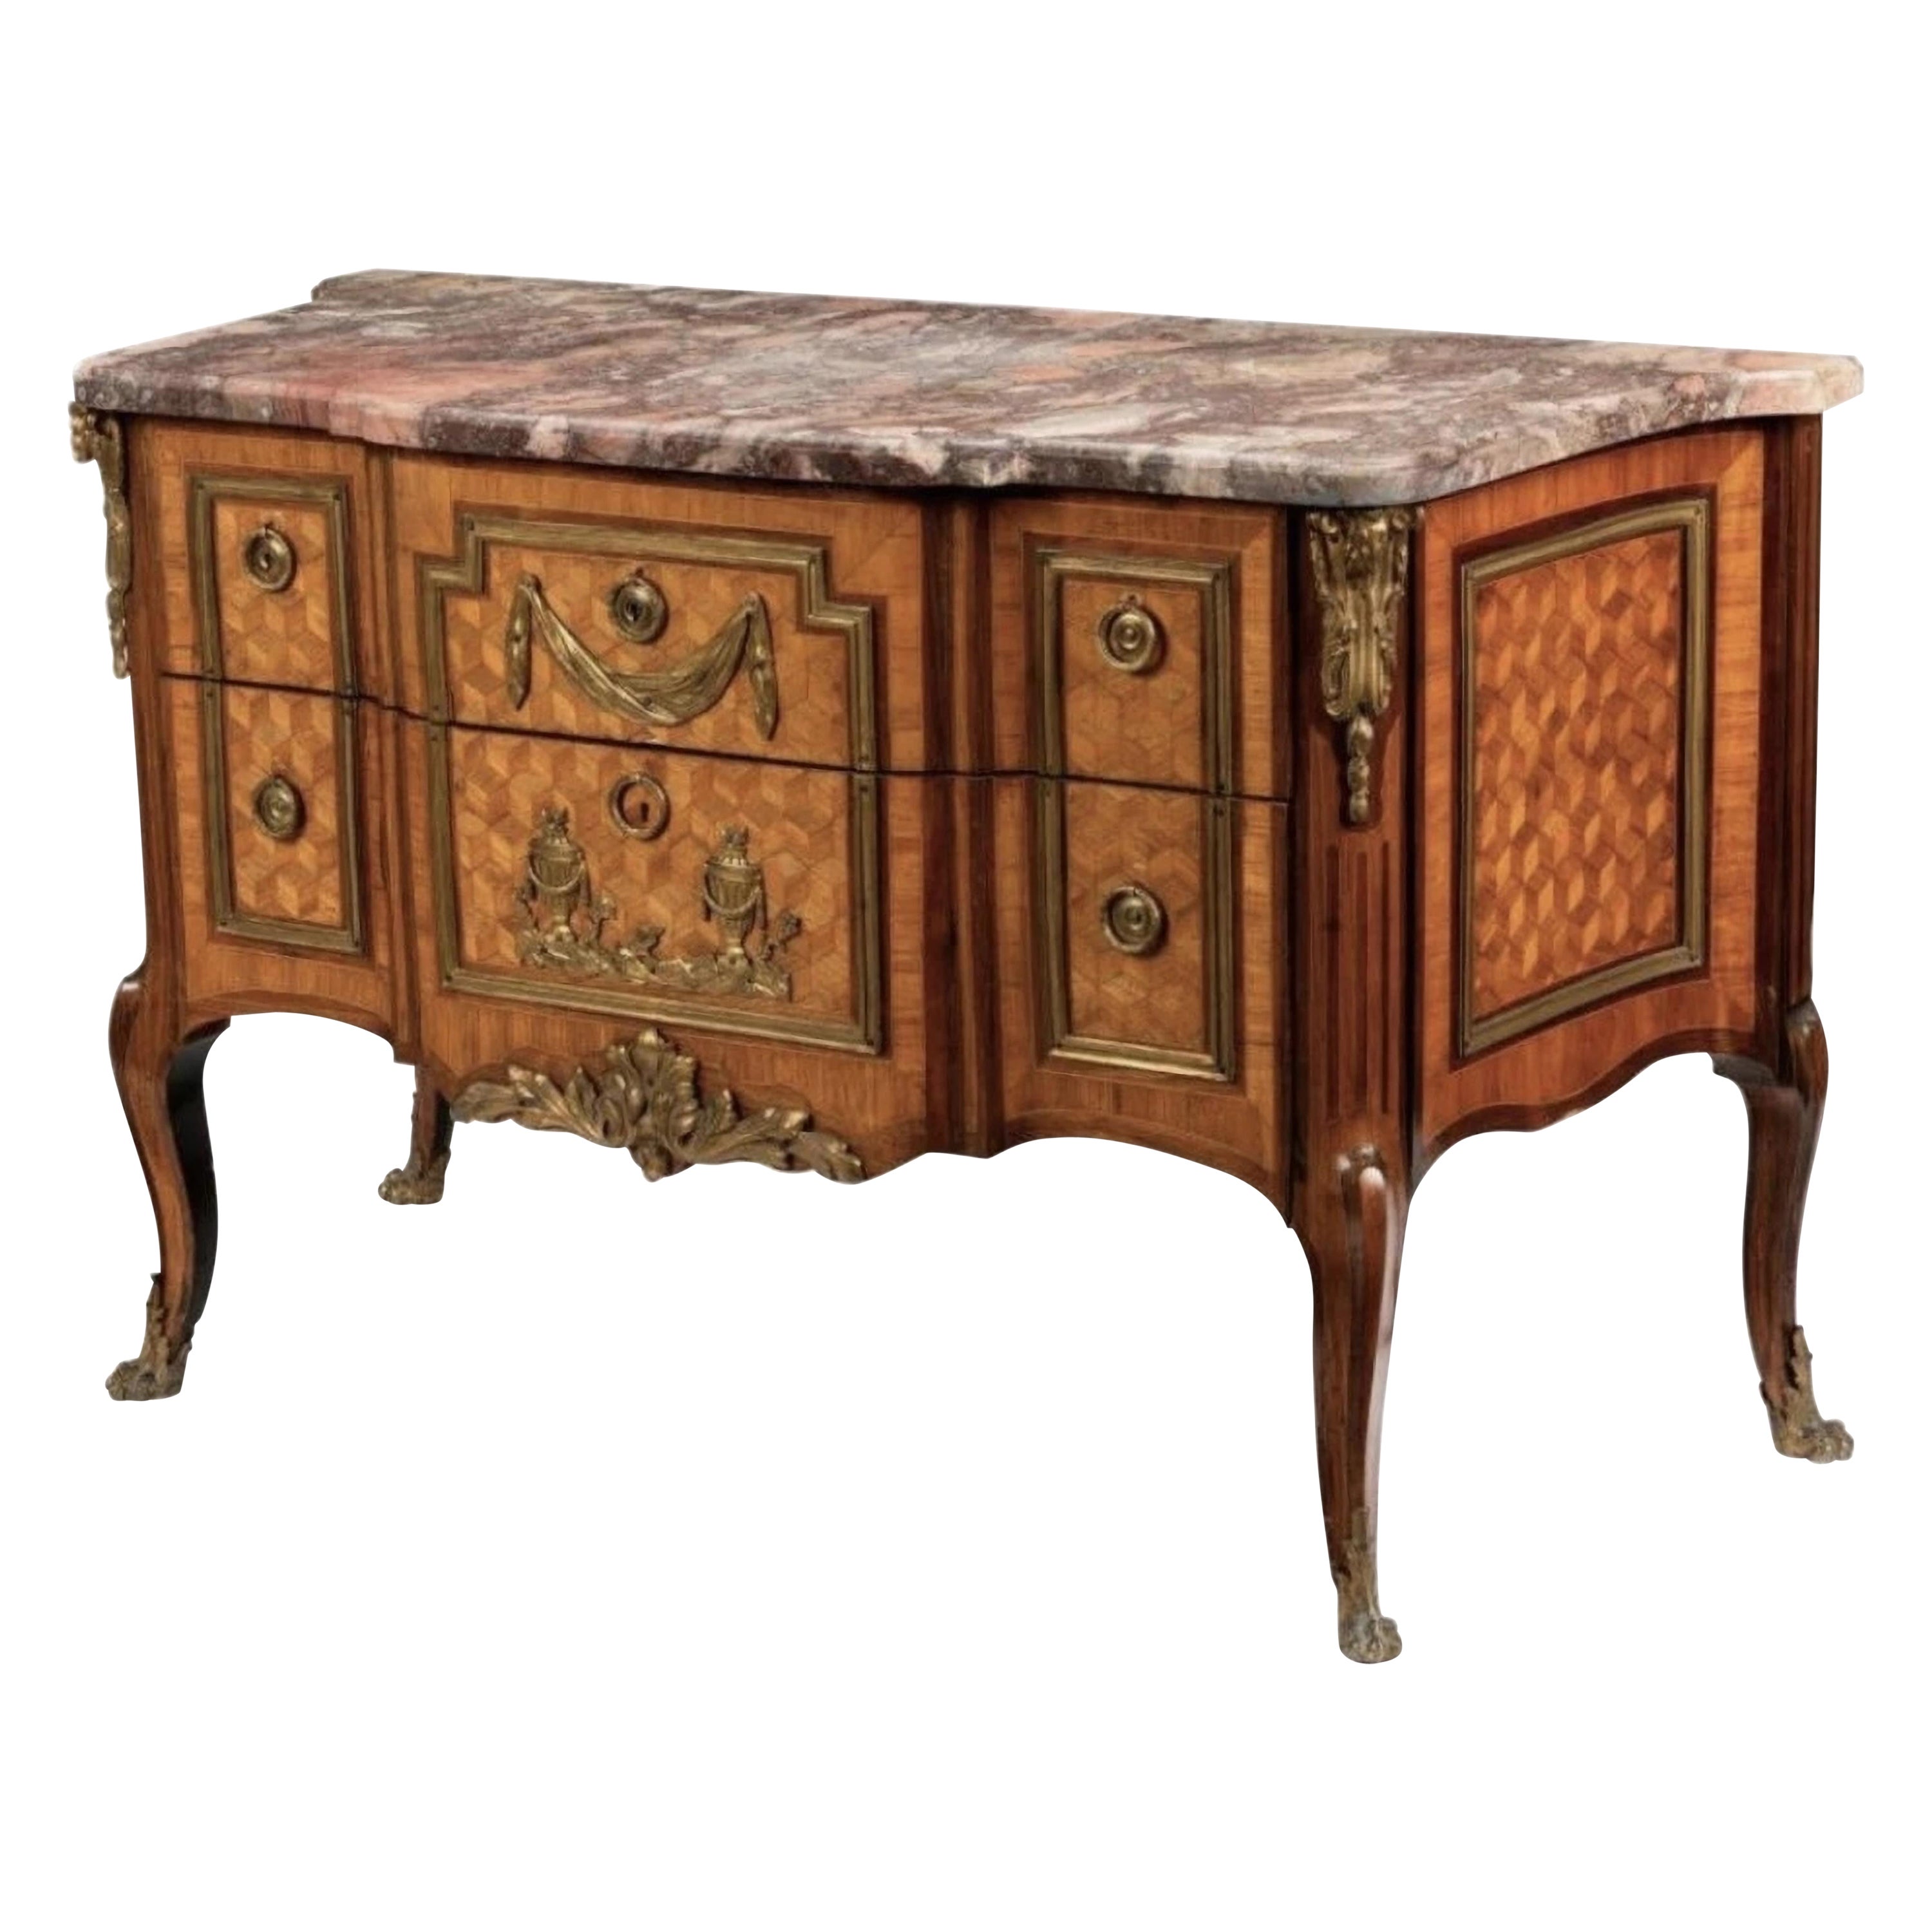 A French Directoire Gilt Bronze Mounted Commode with Marble Top, 19th Century 